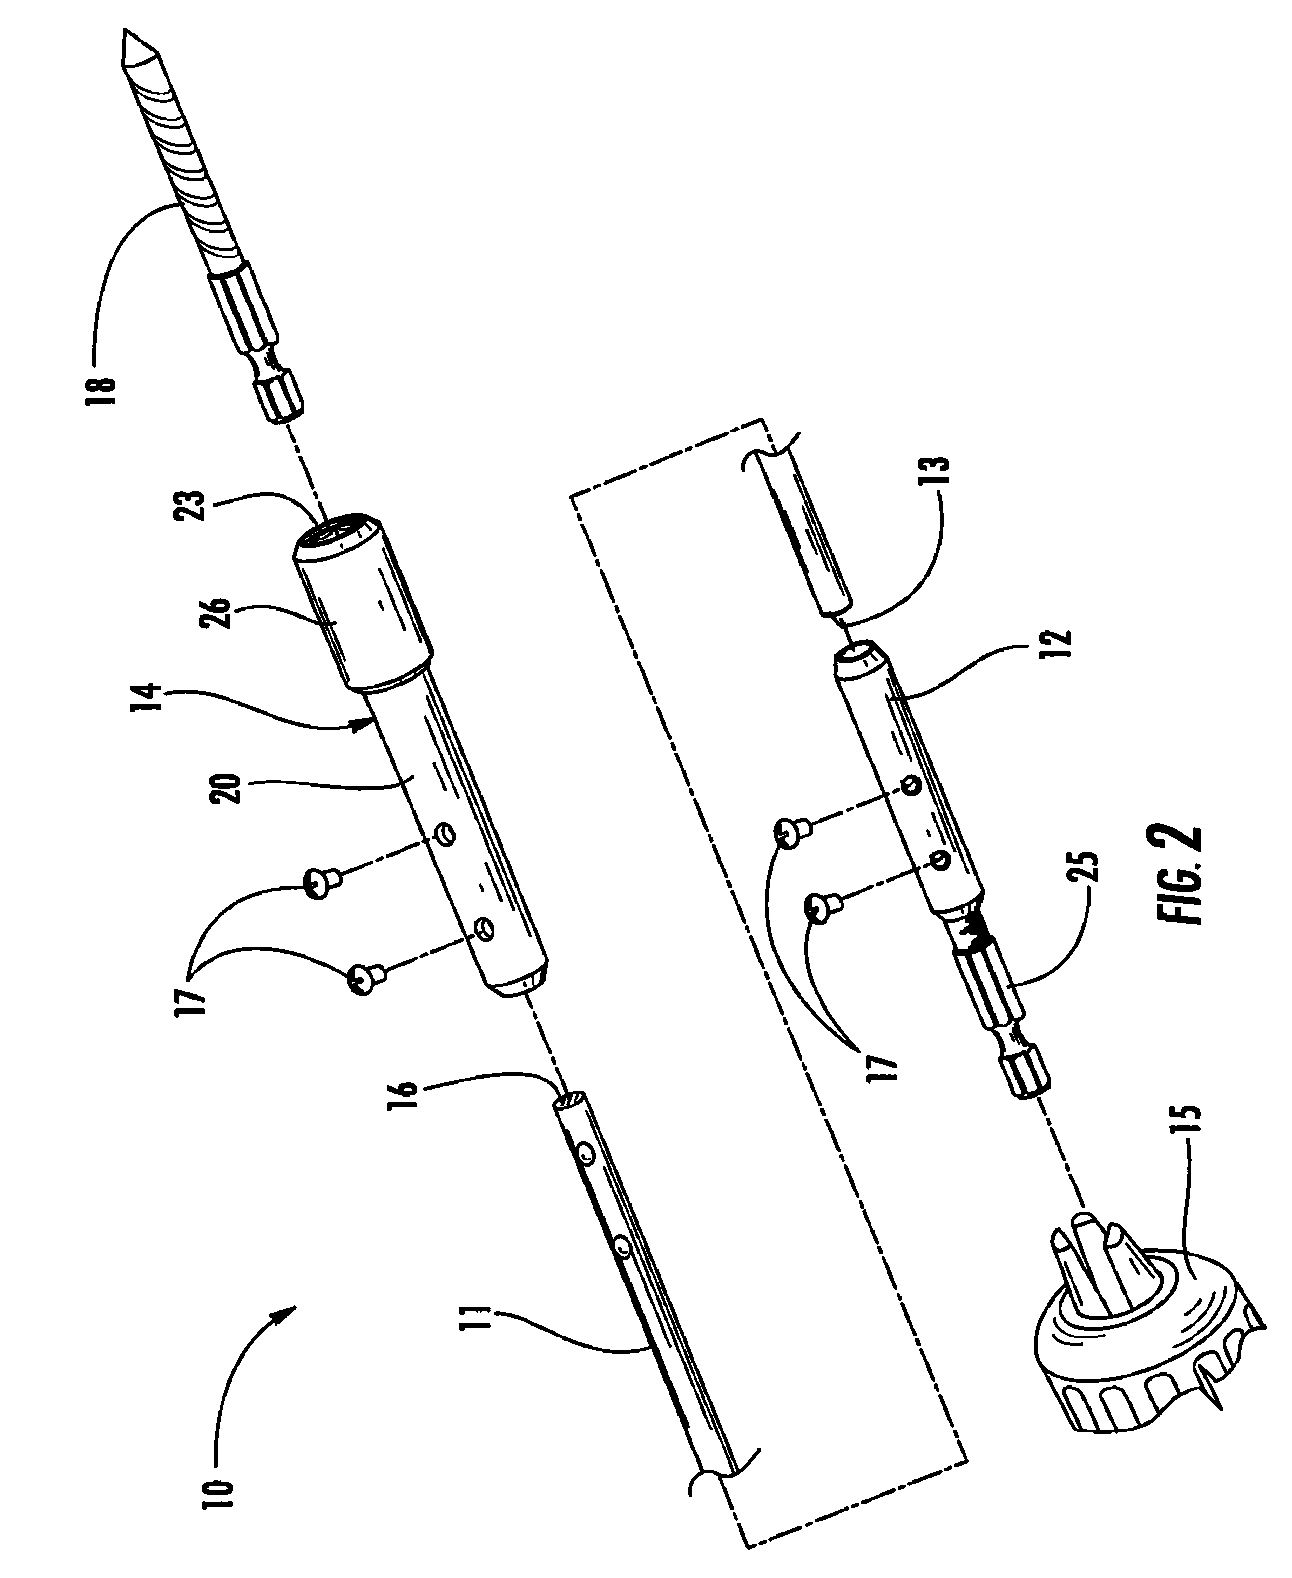 Flexible and extendable drill bit assembly